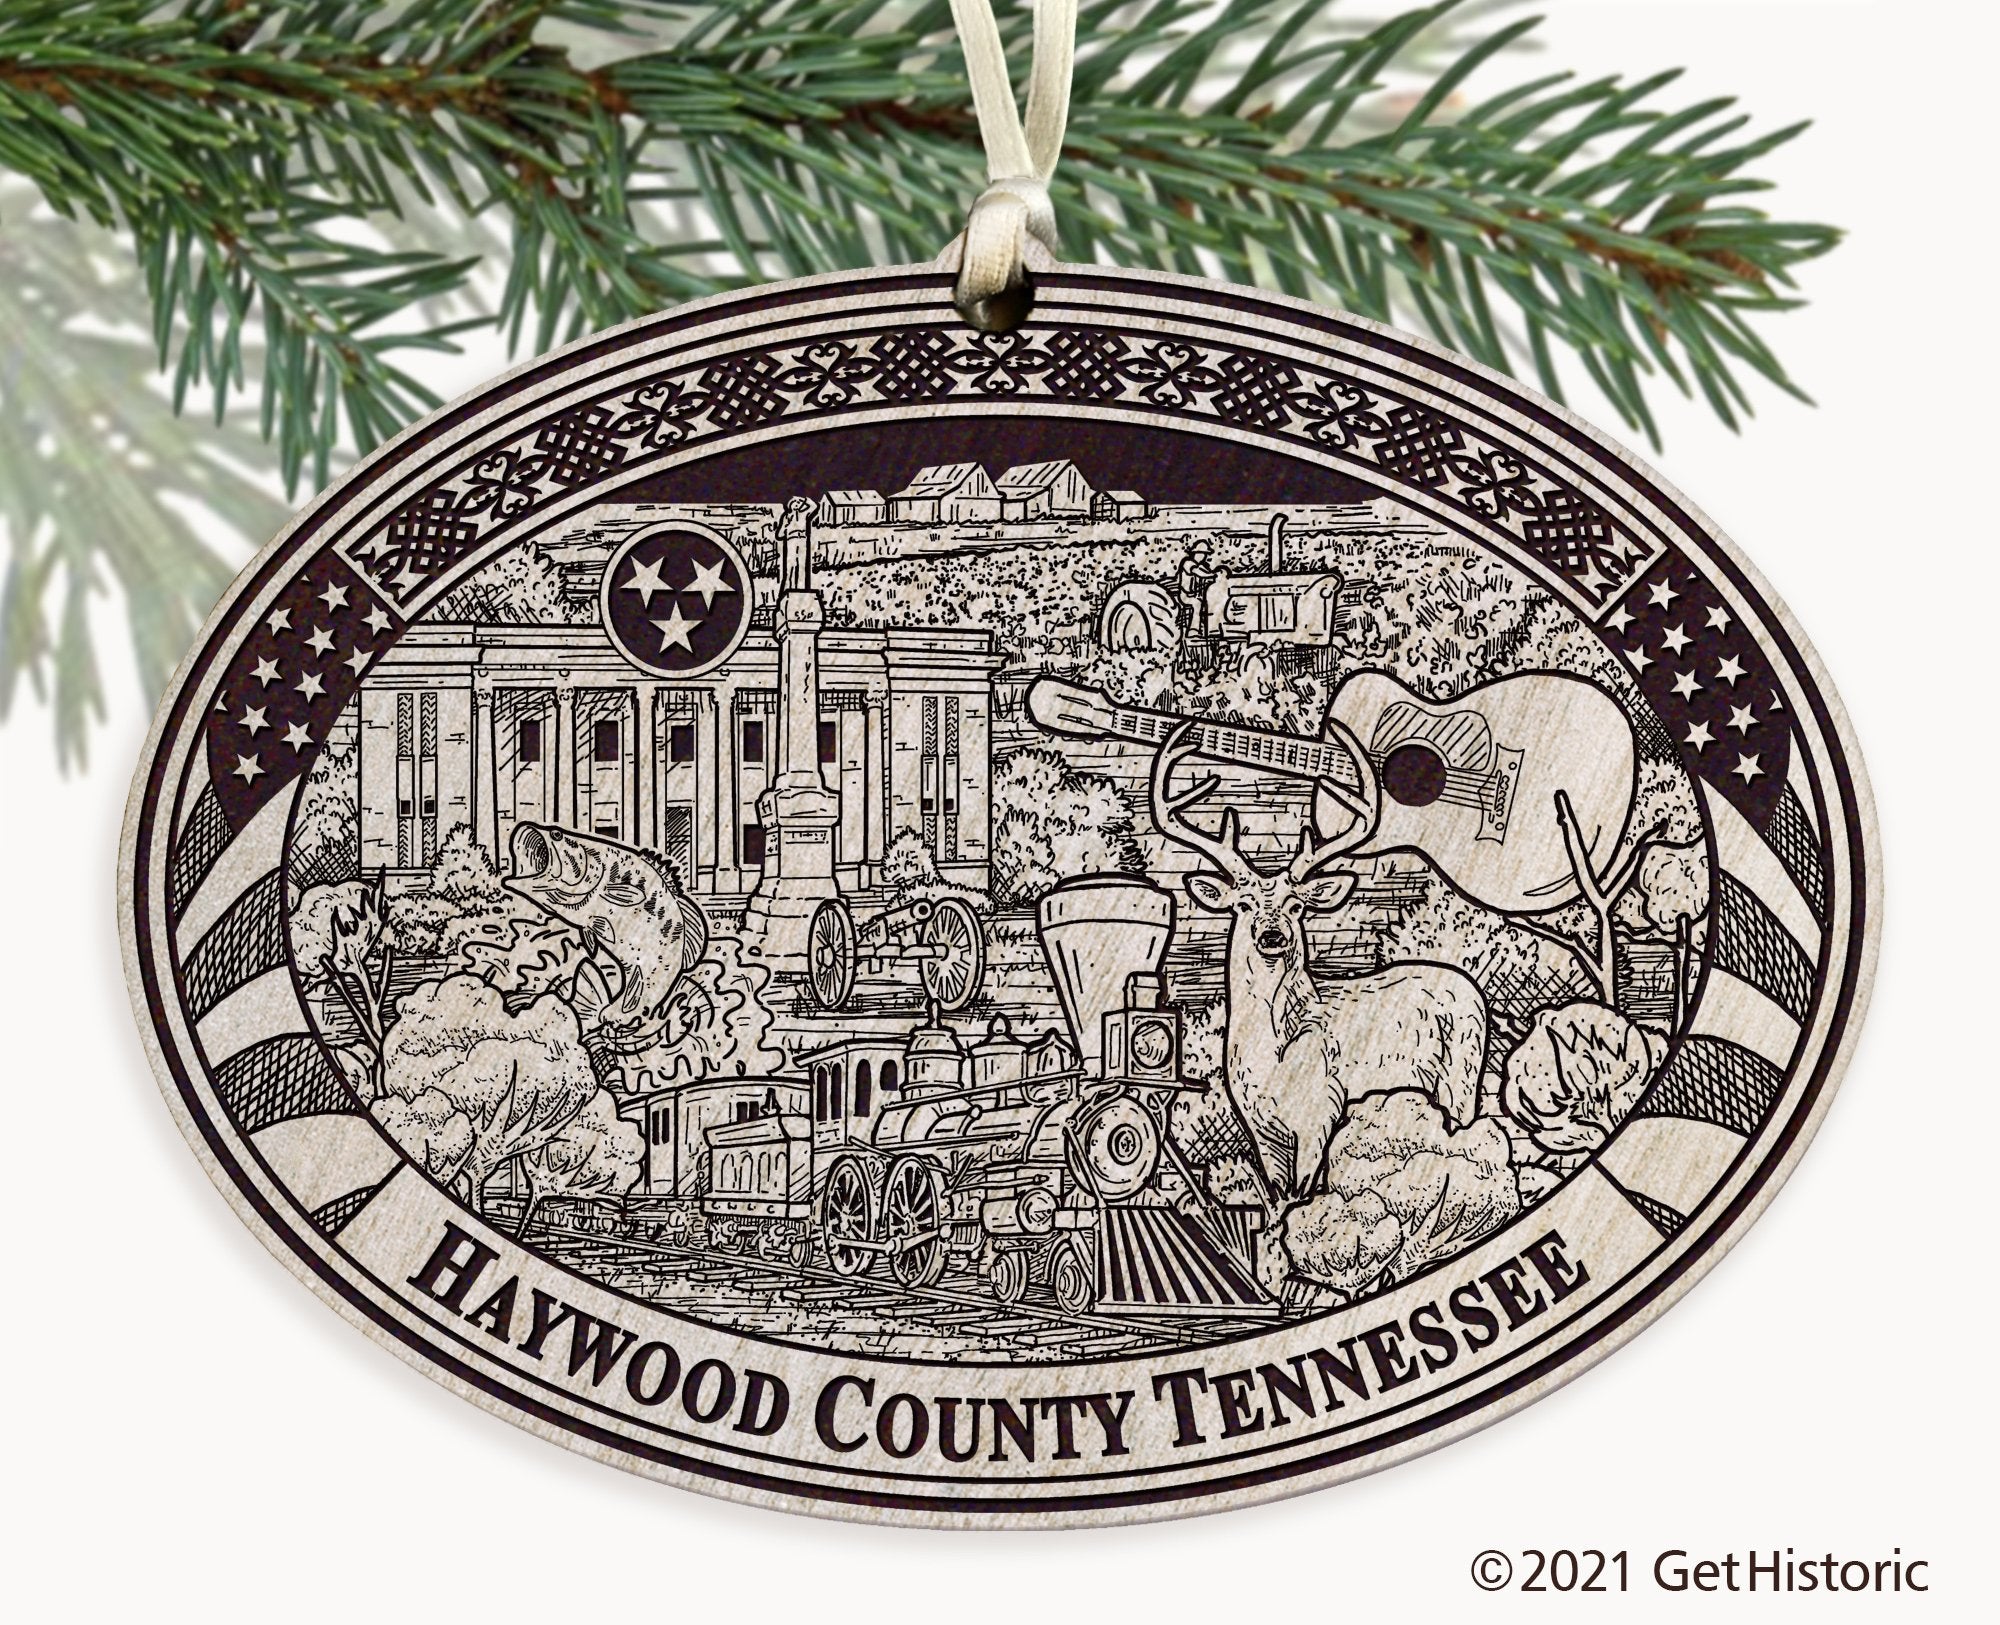 Haywood County Tennessee Engraved Ornament